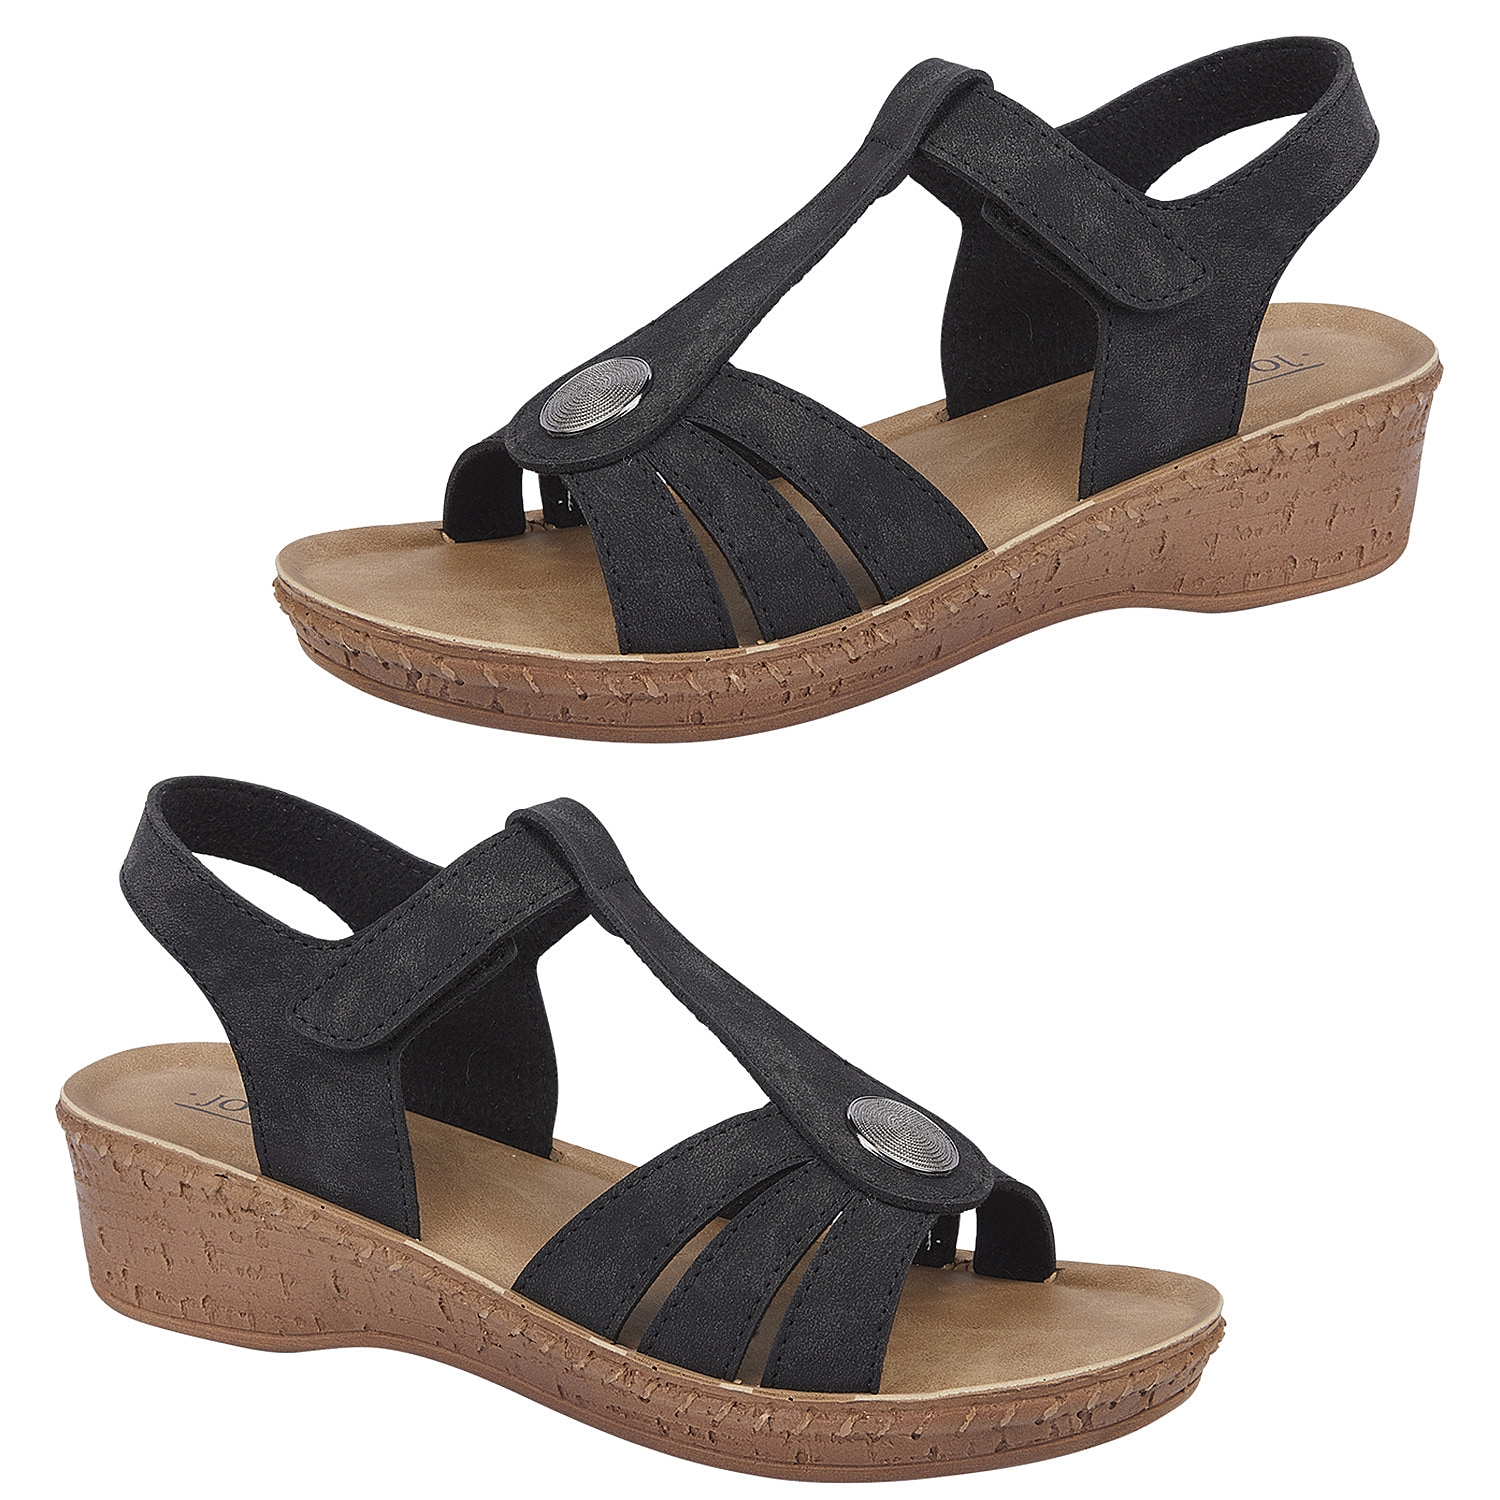 Jo-Joe-Lightweight-ST-Kitts-Sandal-with-Touch-and-Close-Strap-Size-3-B